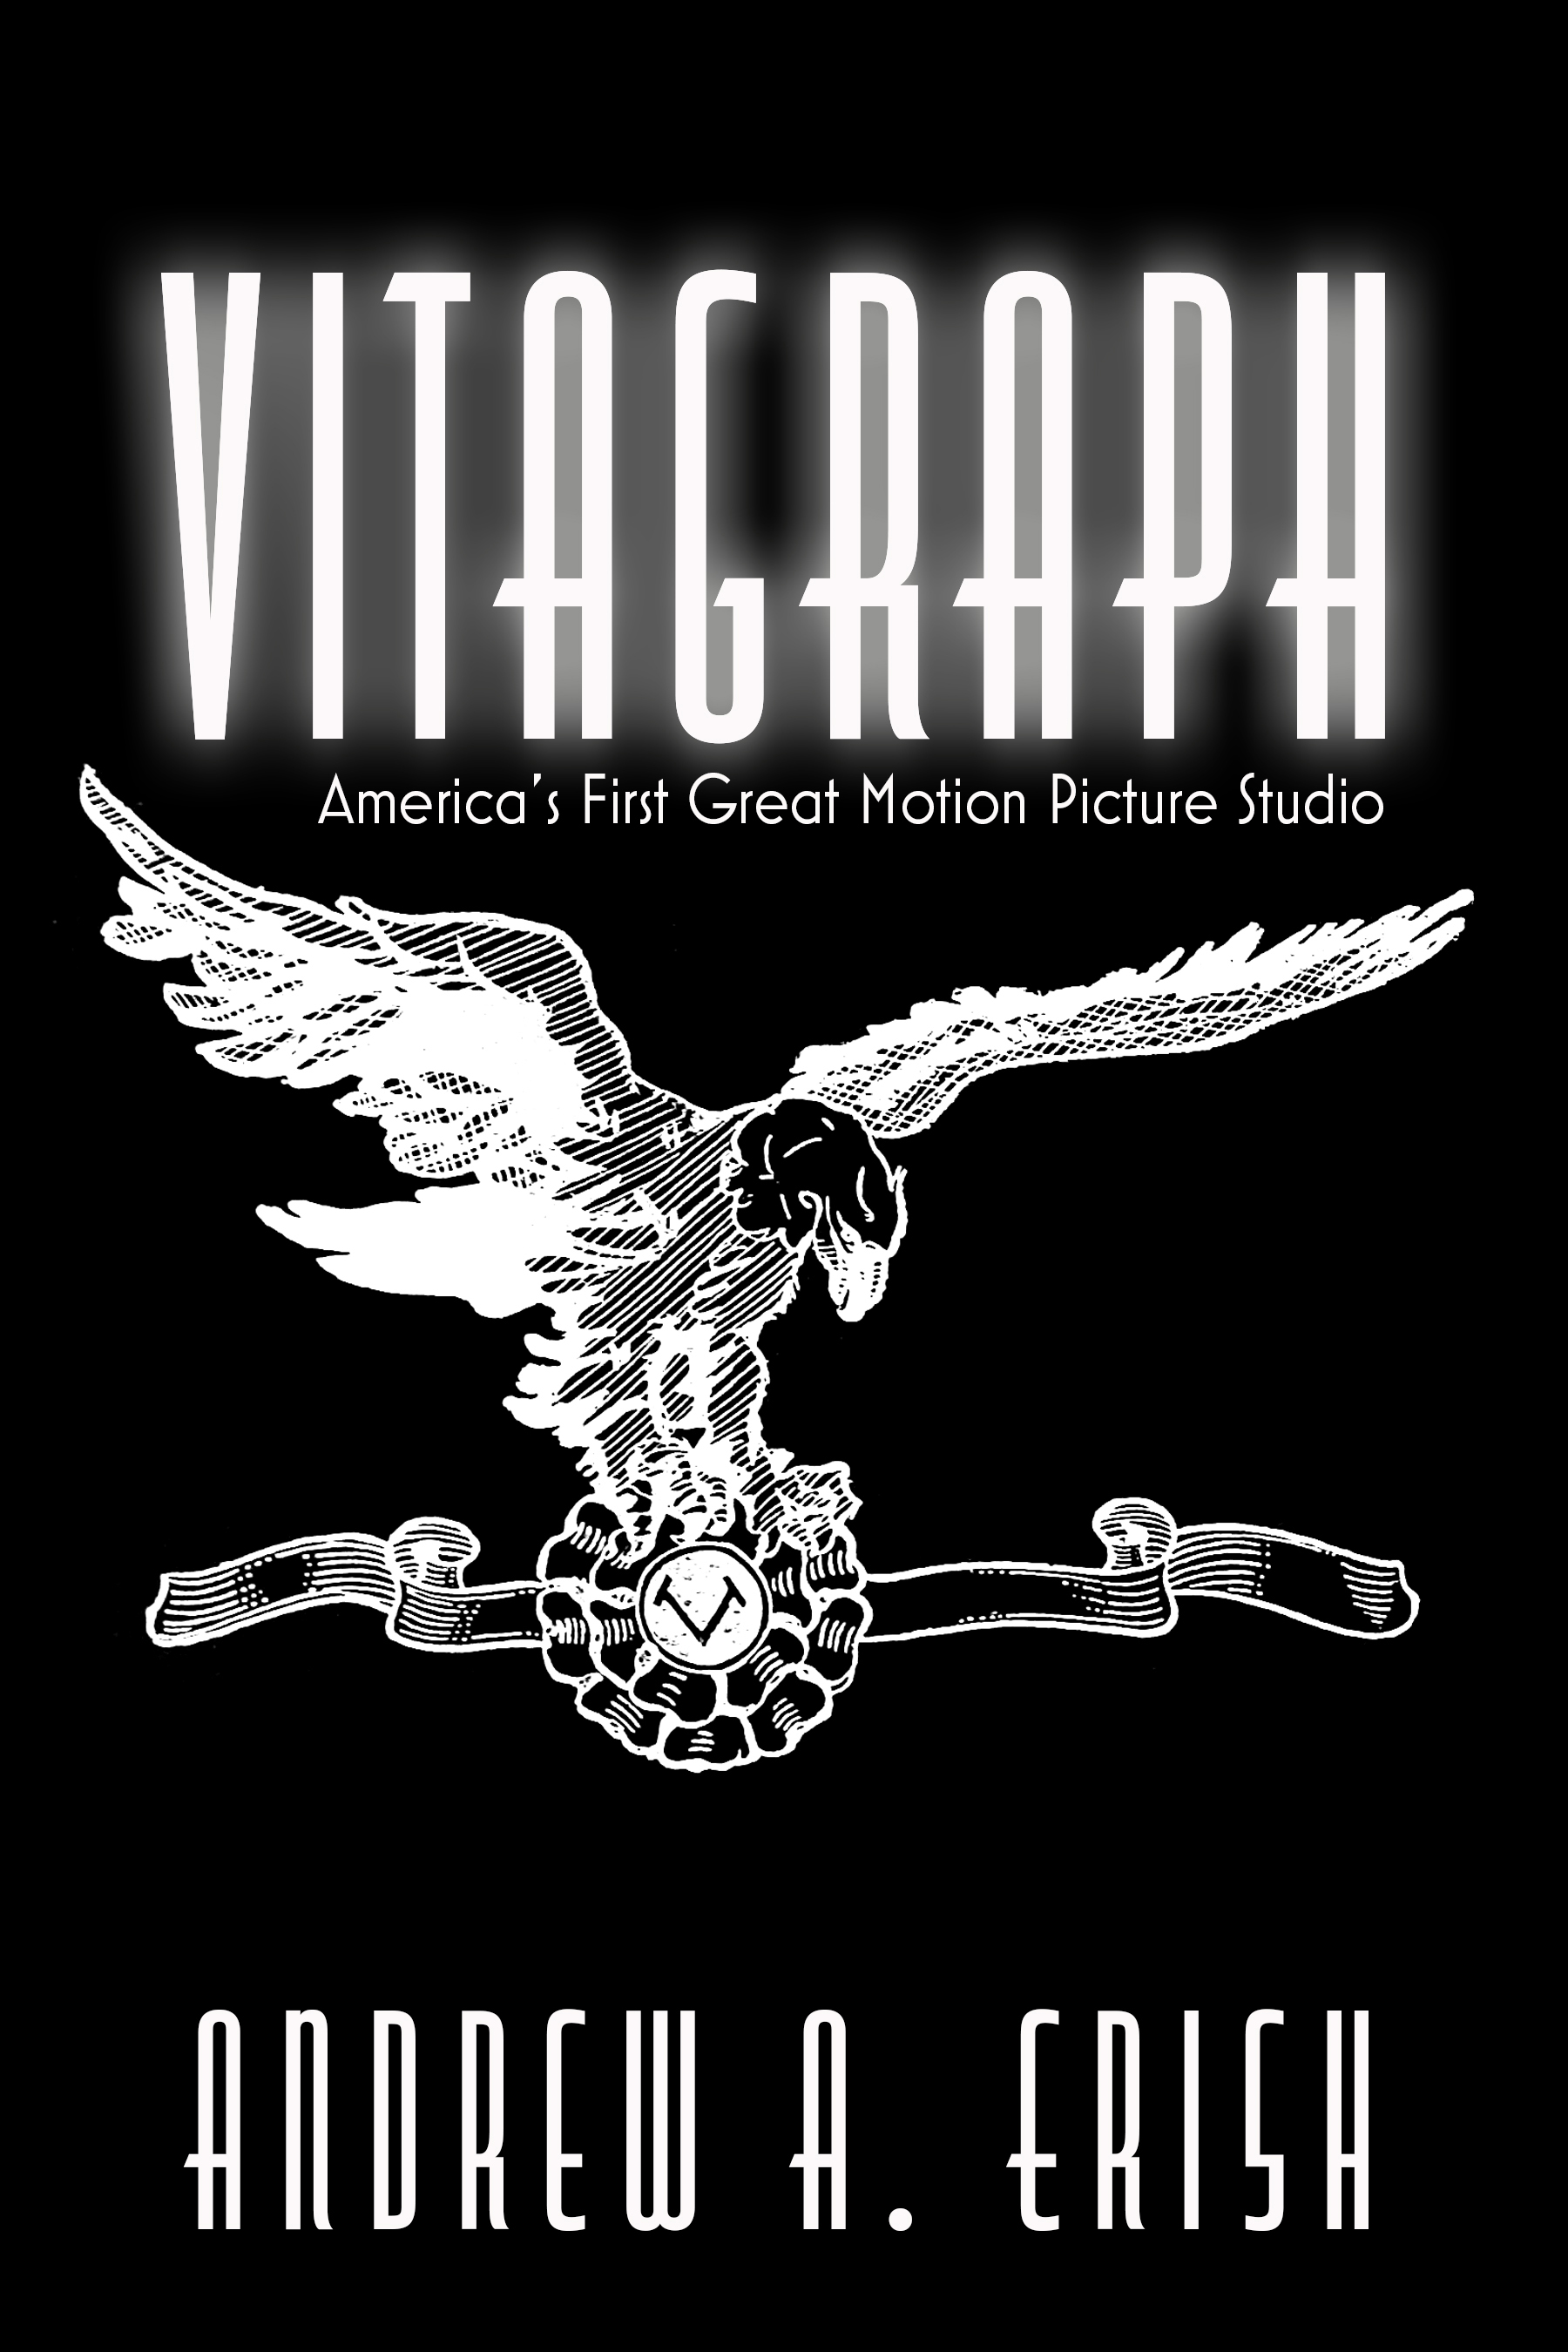 Vitagraph America's First Great Motion Picture Studio – Cinema history